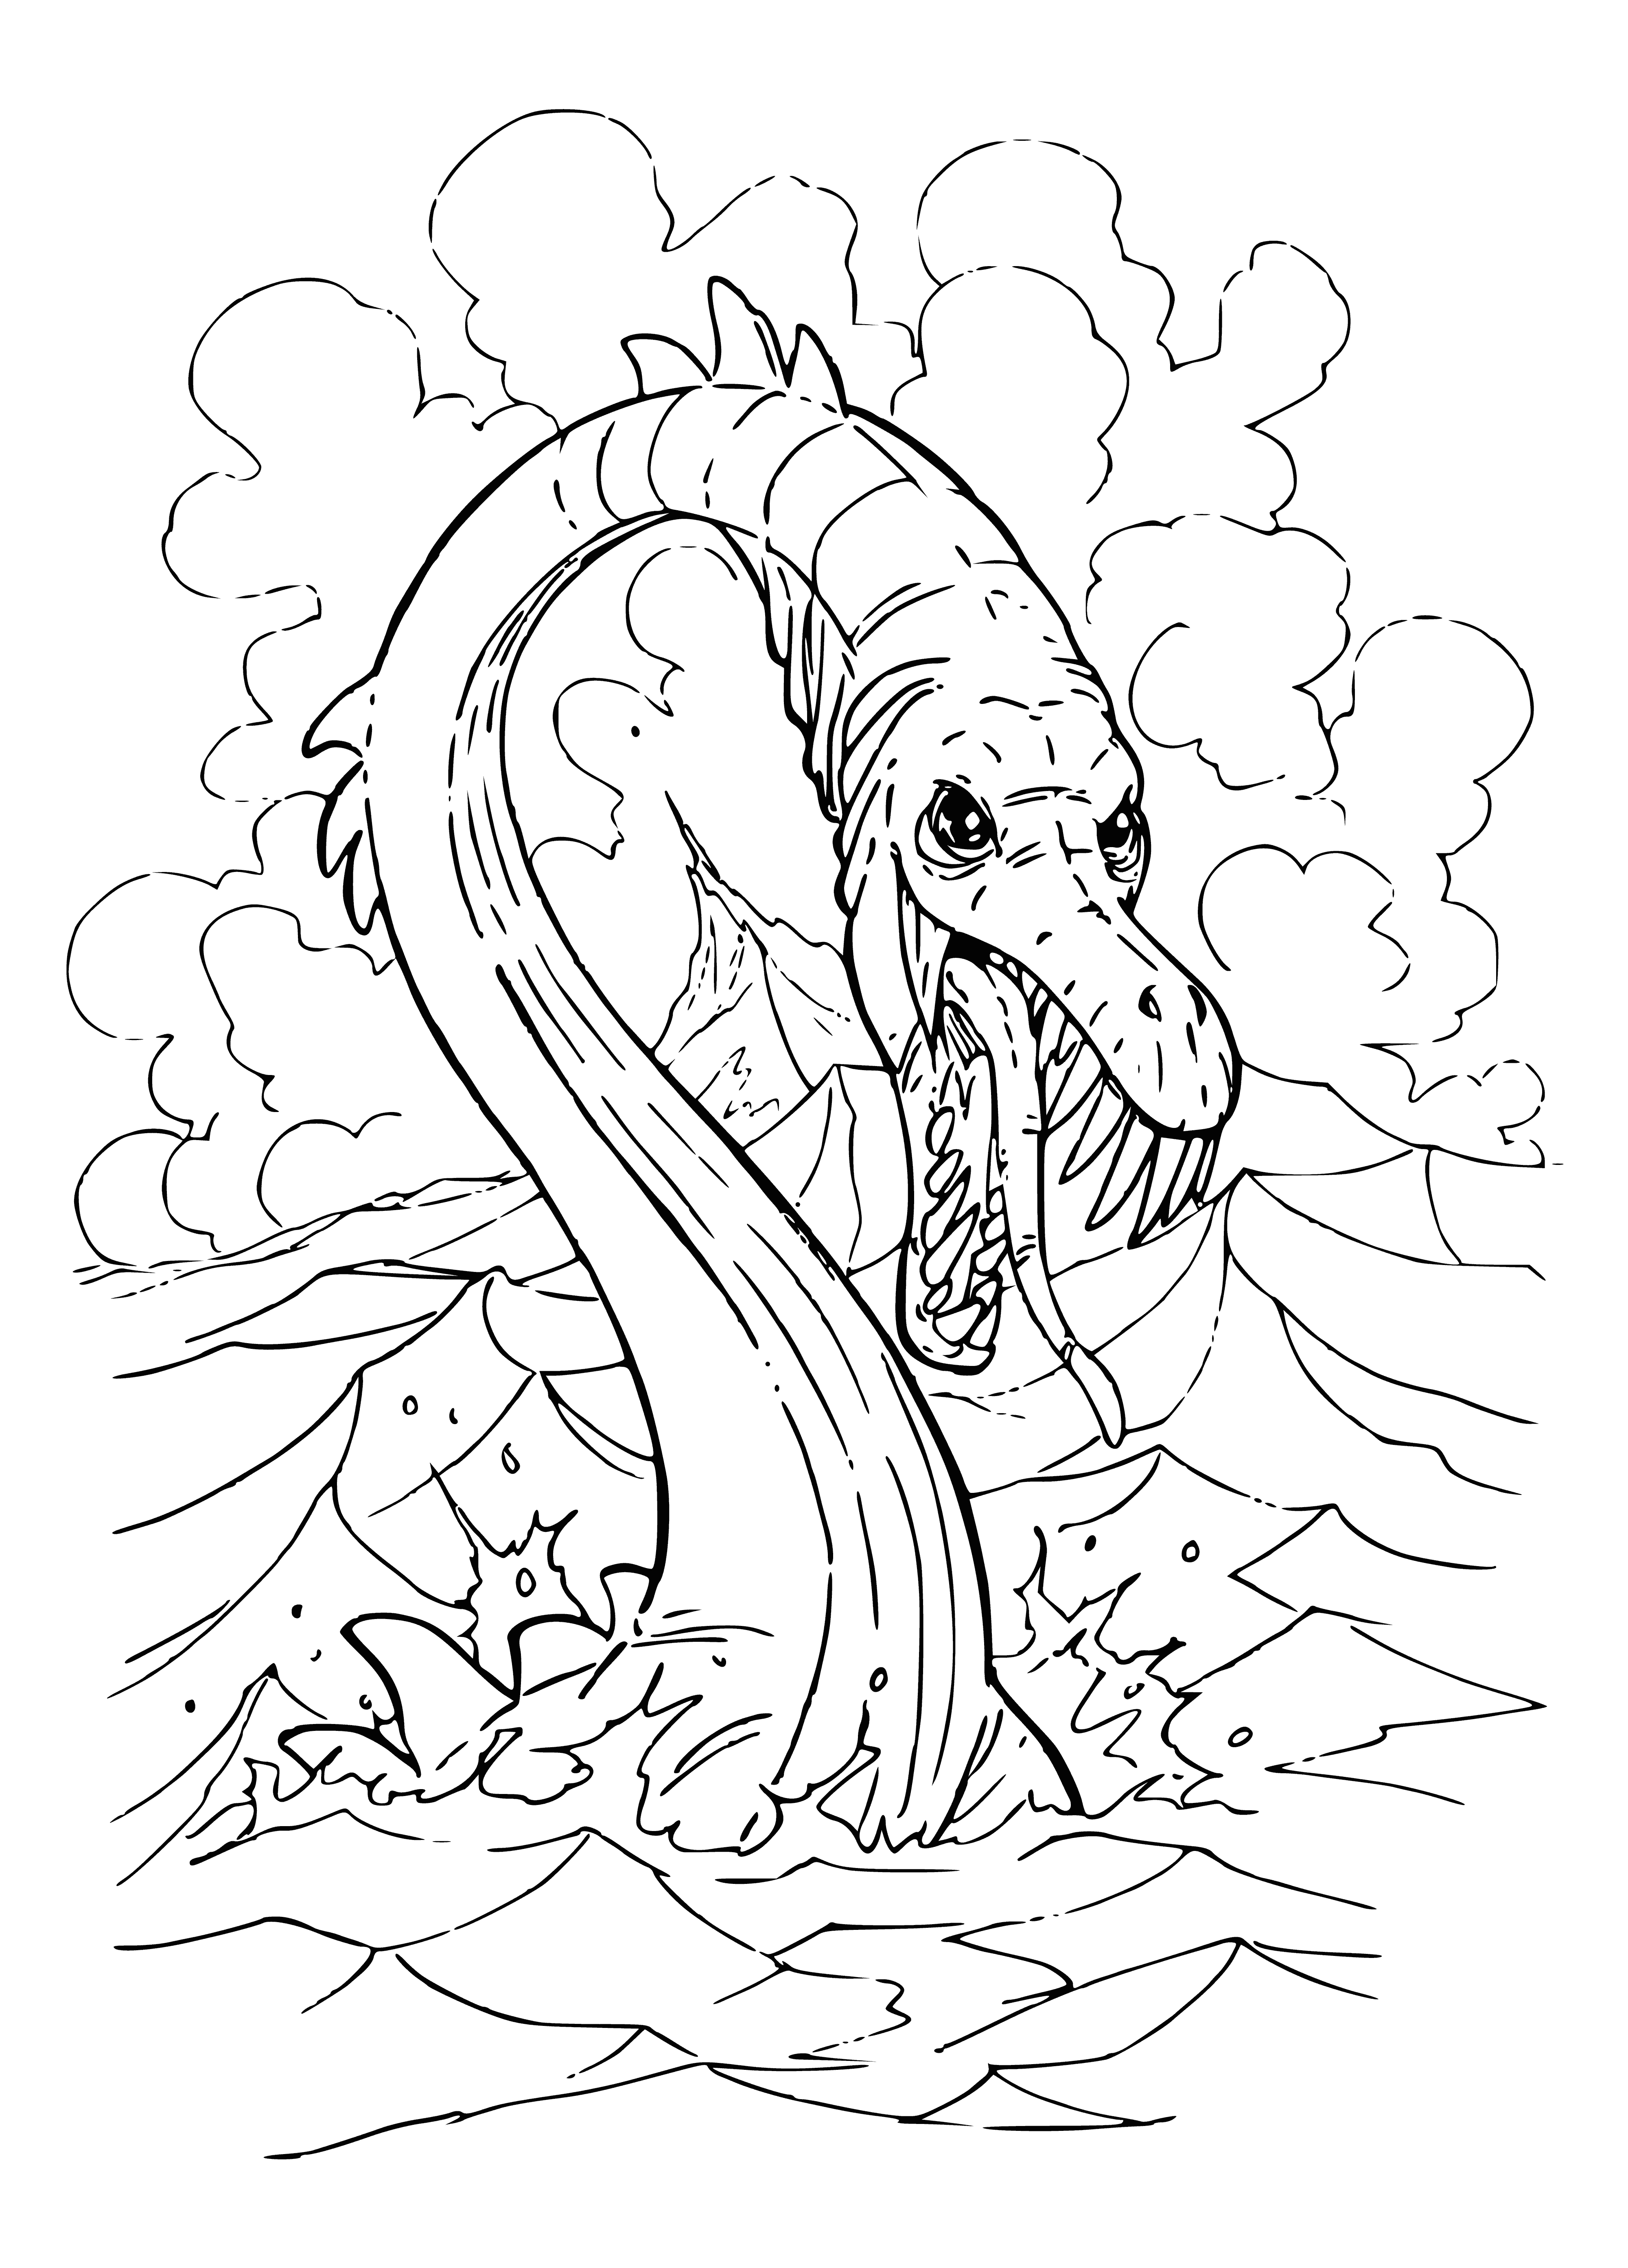 coloring page: A sea creature mash-up of a snake-like body, fins, sharp teeth & glowing green eyes: ready to attack!